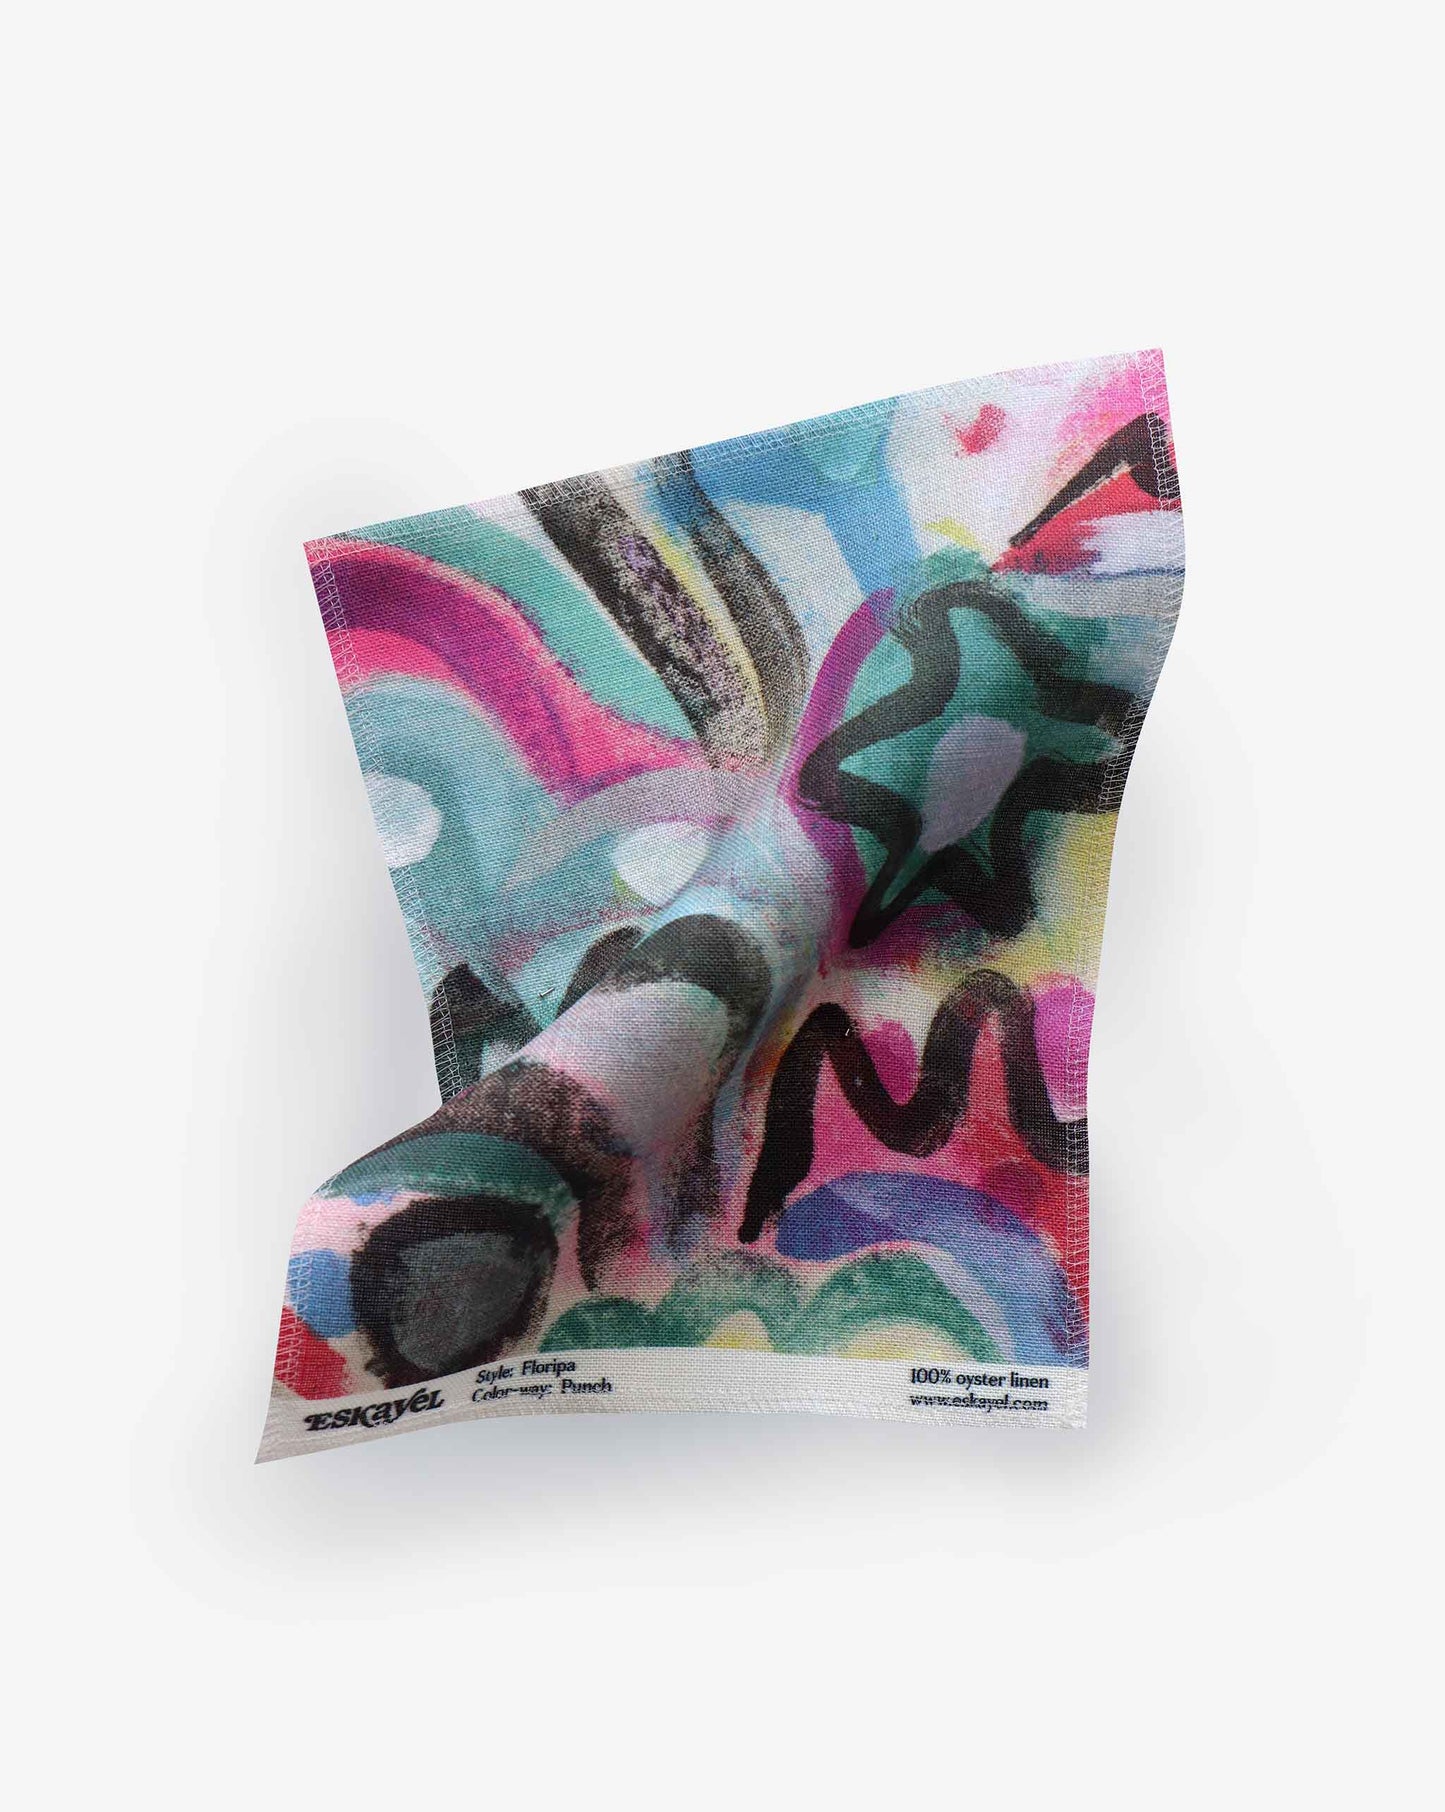 A colorful Floripa Fabric Sample handkerchief with an abstract design on 100% Egyptian cotton, displayed on a white background. Order Sample available.